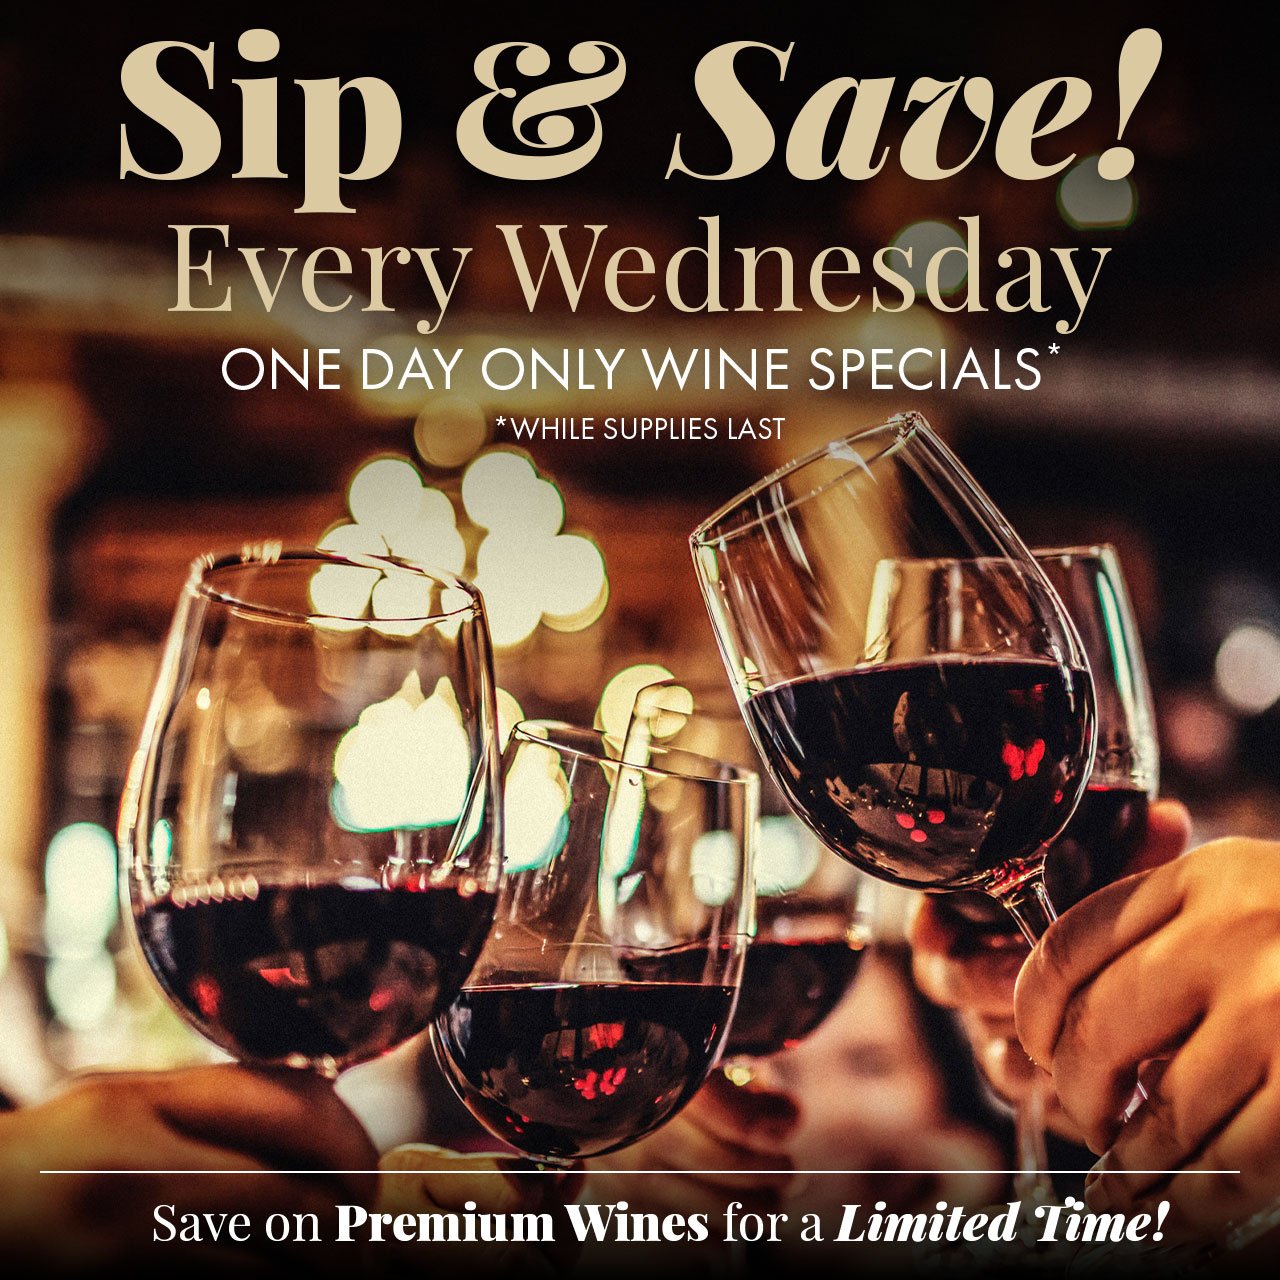 Sip & Savor Every Wednesday. One-day Only Wine Specials (While Supplies Last). Save on Premium Wines for a Limited Time!!